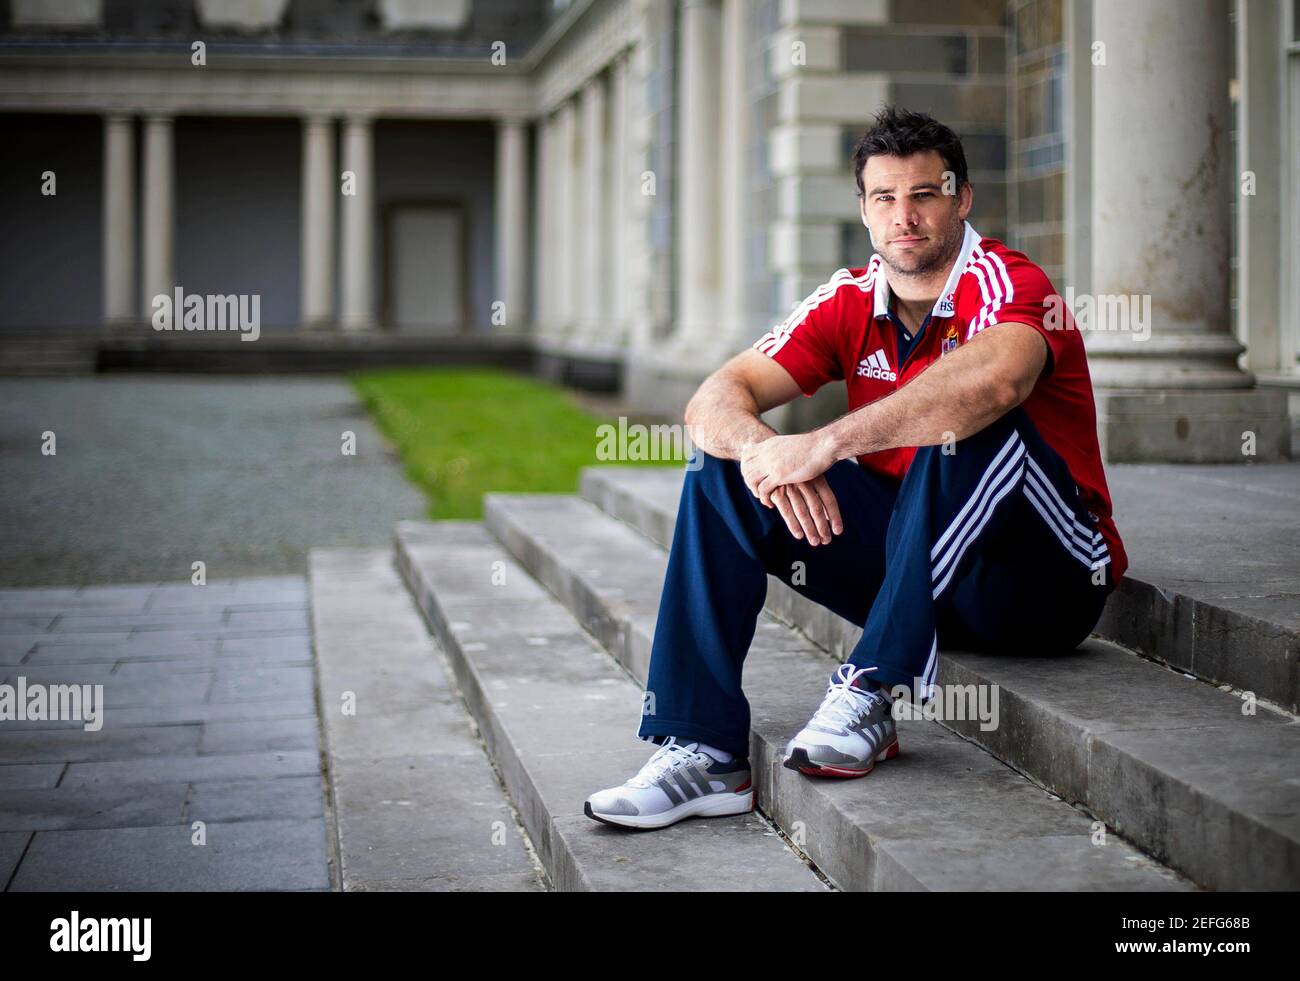 Rugby Union - British & Irish Lions Press Conference - Carton House, Dublin  Maynooth, Co. Kildare, Ireland - 20/5/13 British & Irish Lions' Mike  Phillips poses after the press conference Mandatory Credit: